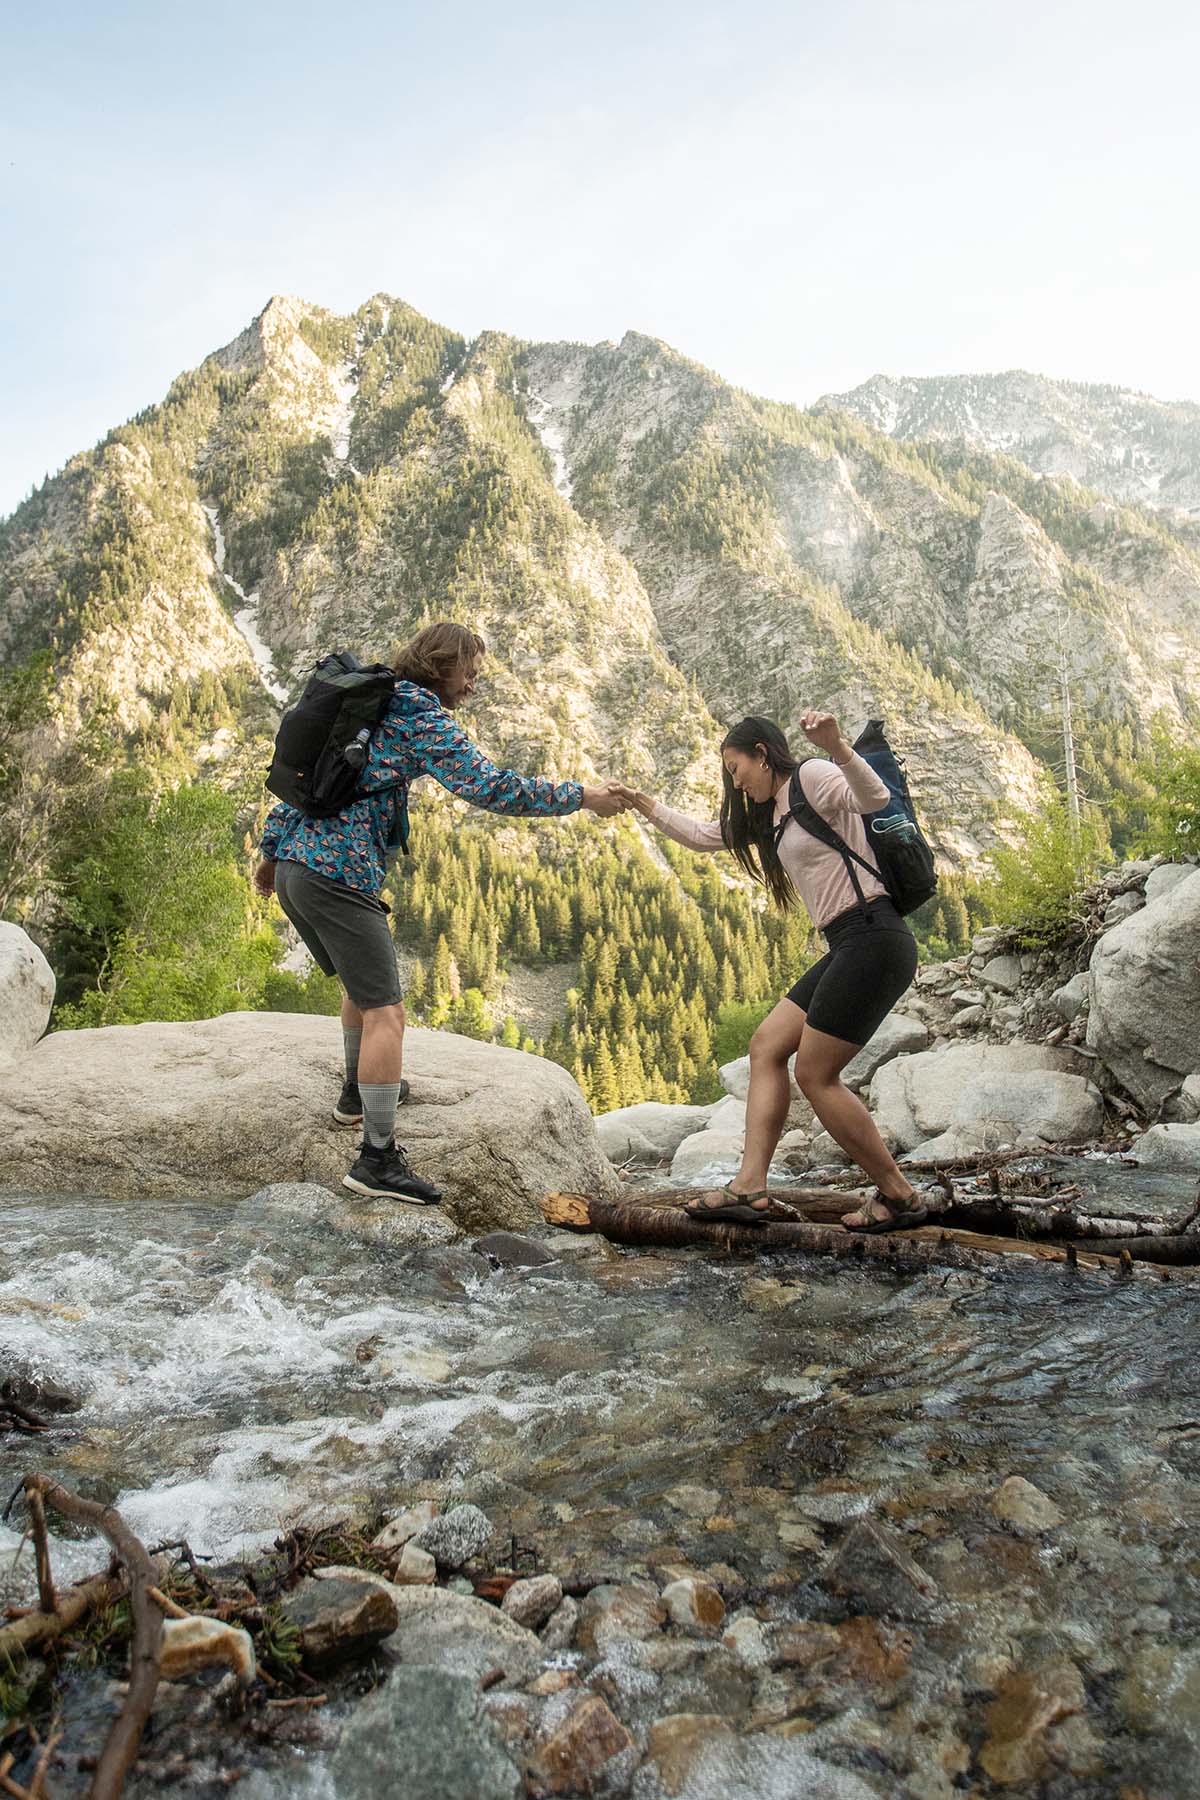 Spring Hiking Checklist - Get Your Gear Ready For The Trail!